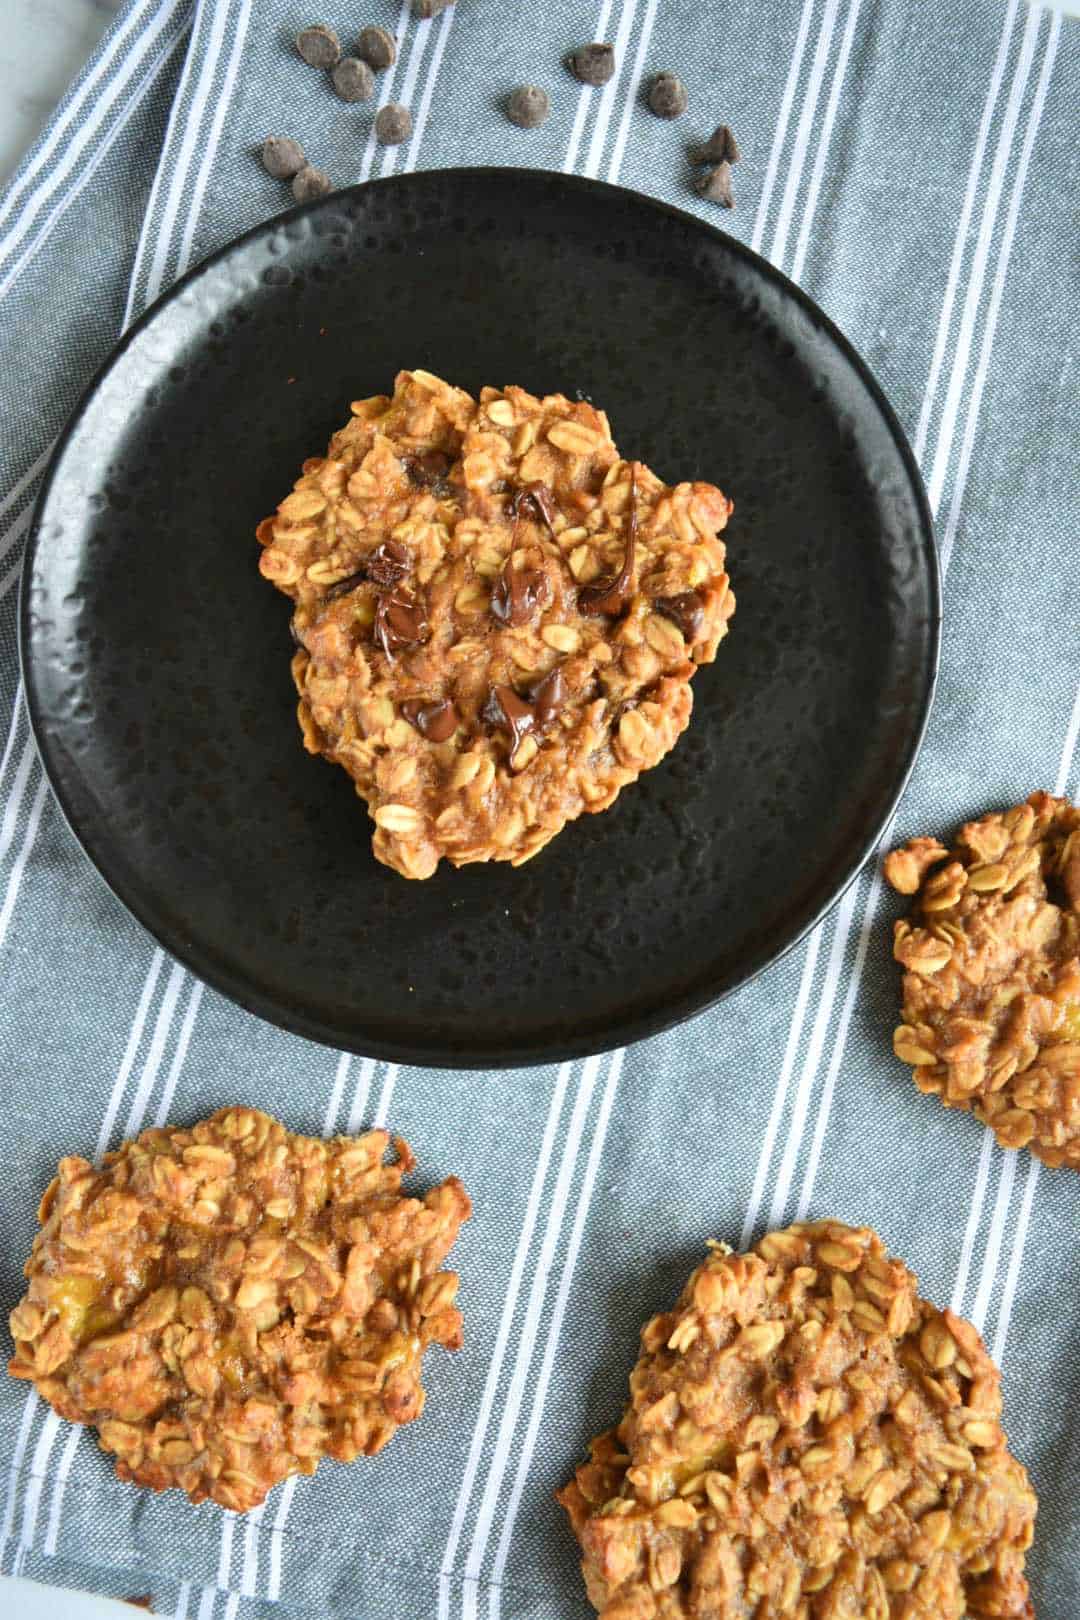 Chocolate chip peanut butter oatmeal cookie on a plate, surrounded by more cookies.